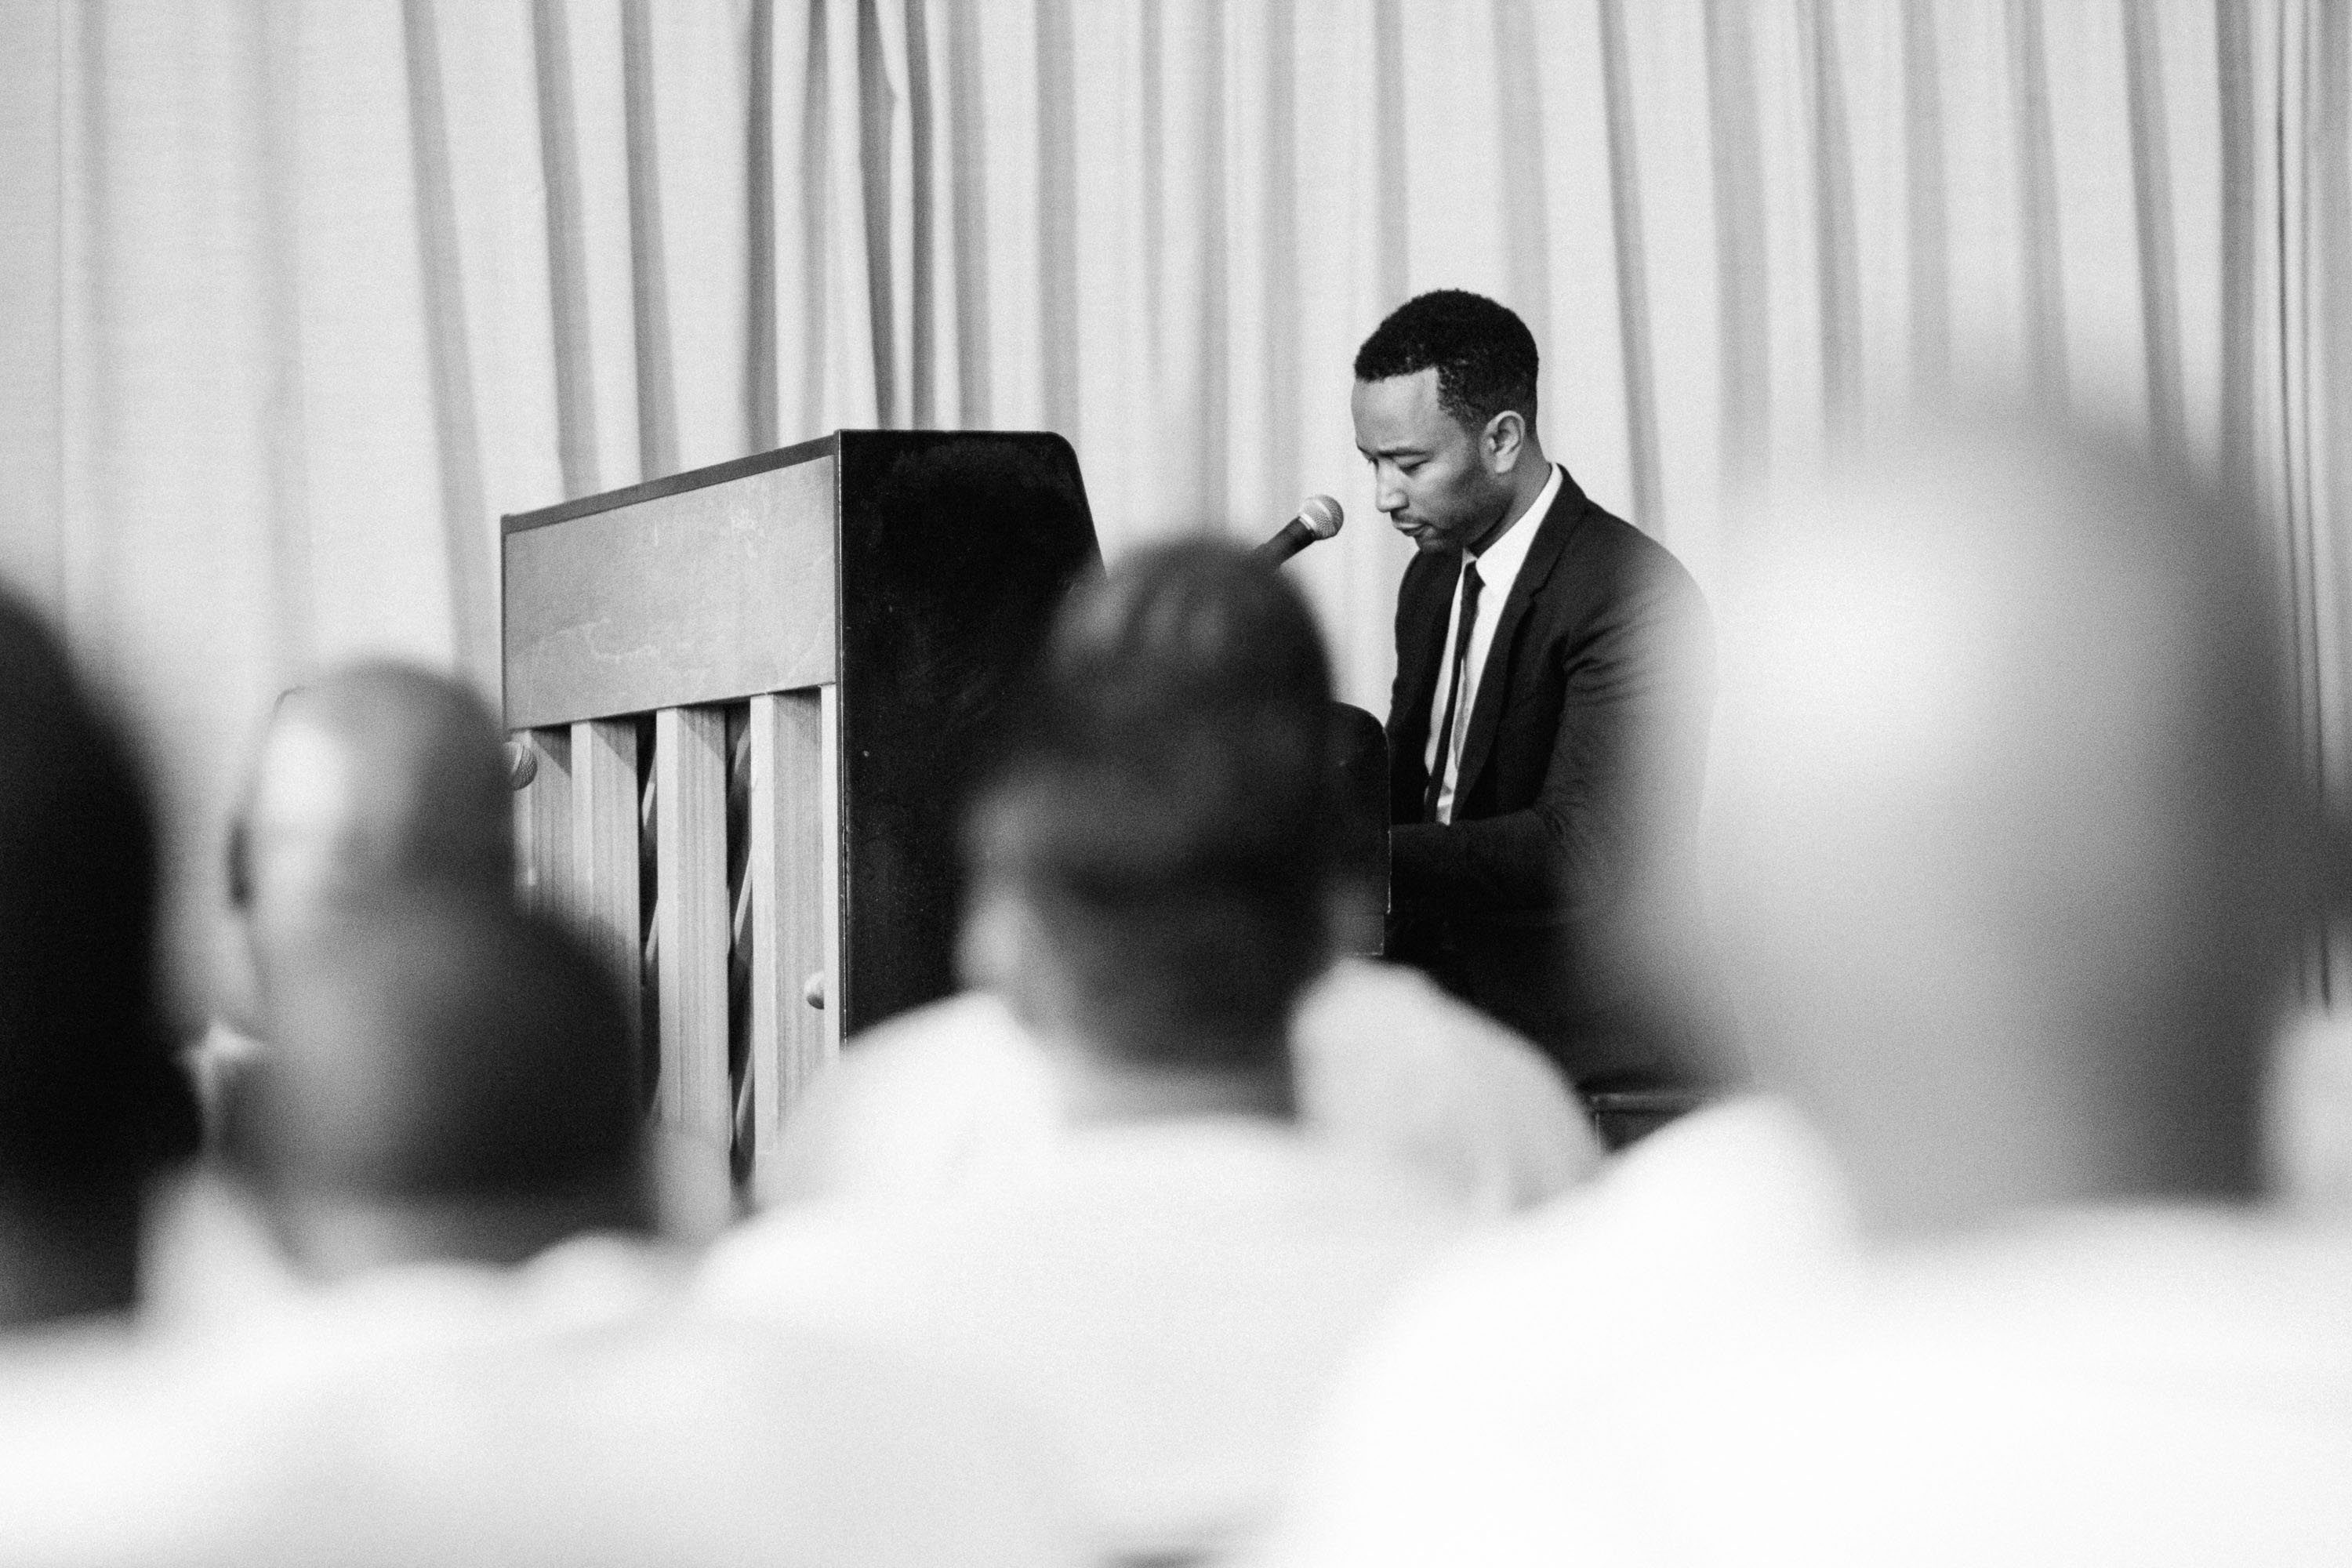 John Legend in the Travis County Correctional Complex in Austin, TX, on April 16, 2015. (Eric Ryan Anderson)